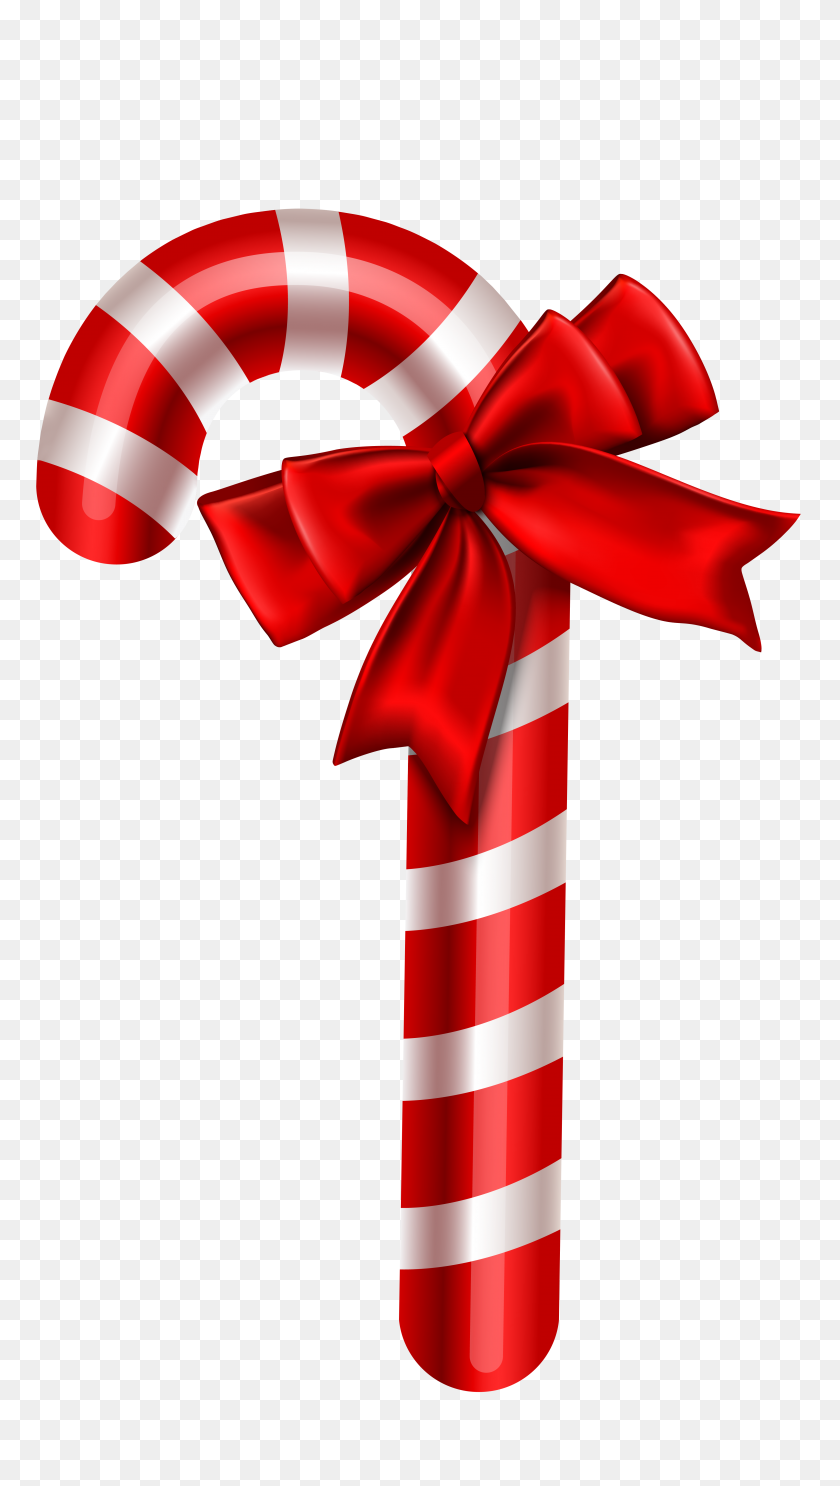 3987x7294 Candy Cane No Background - Peppermint Candy PNG